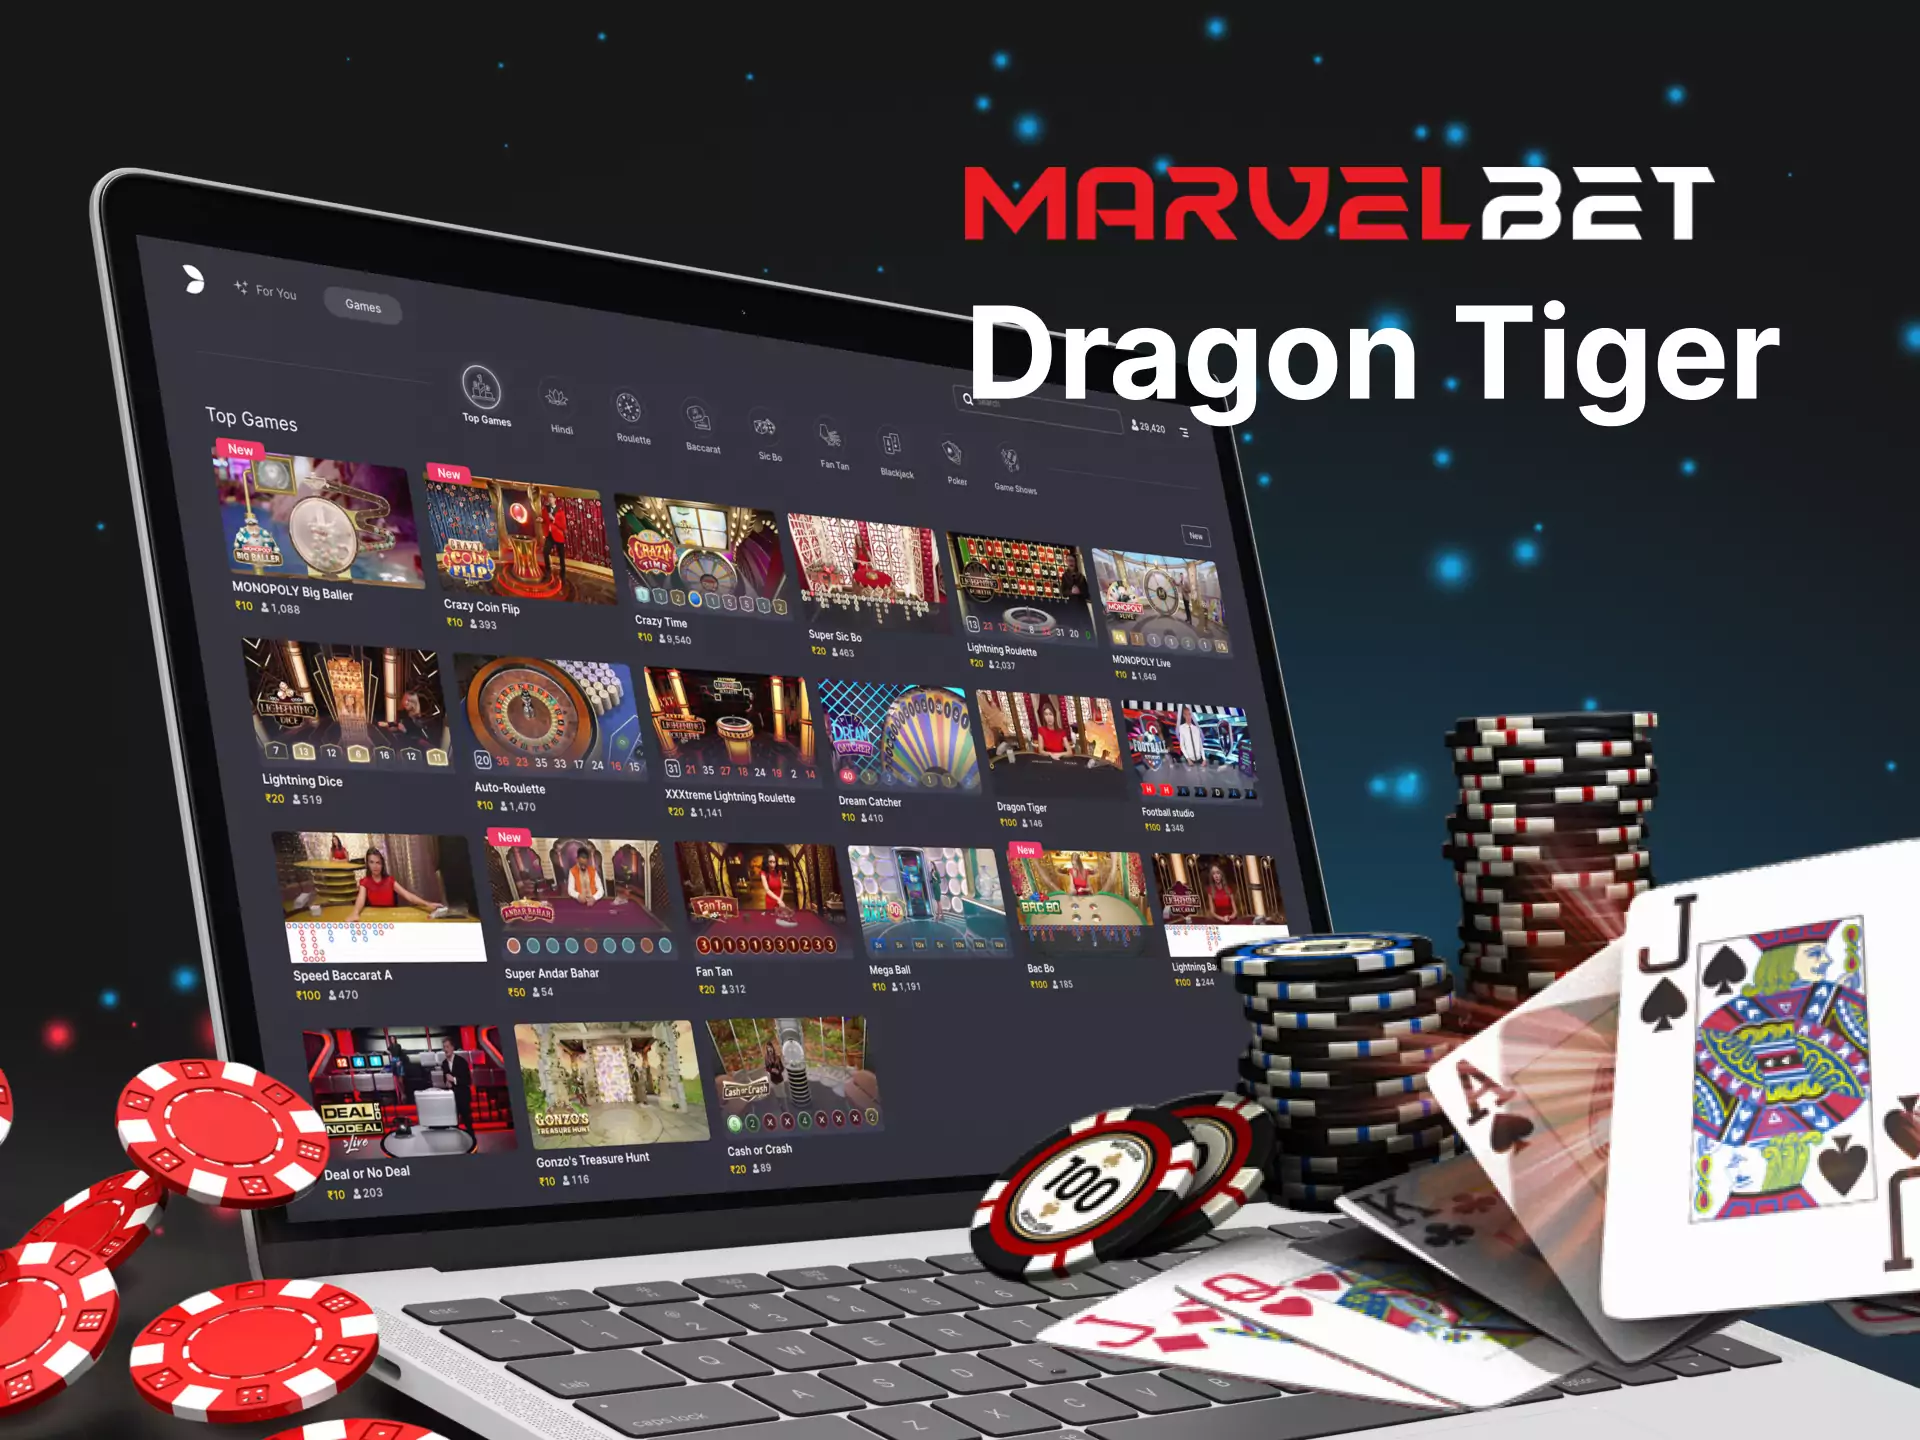 Dragon Tiger is a fortune game presented in the Marvelbet Casino.